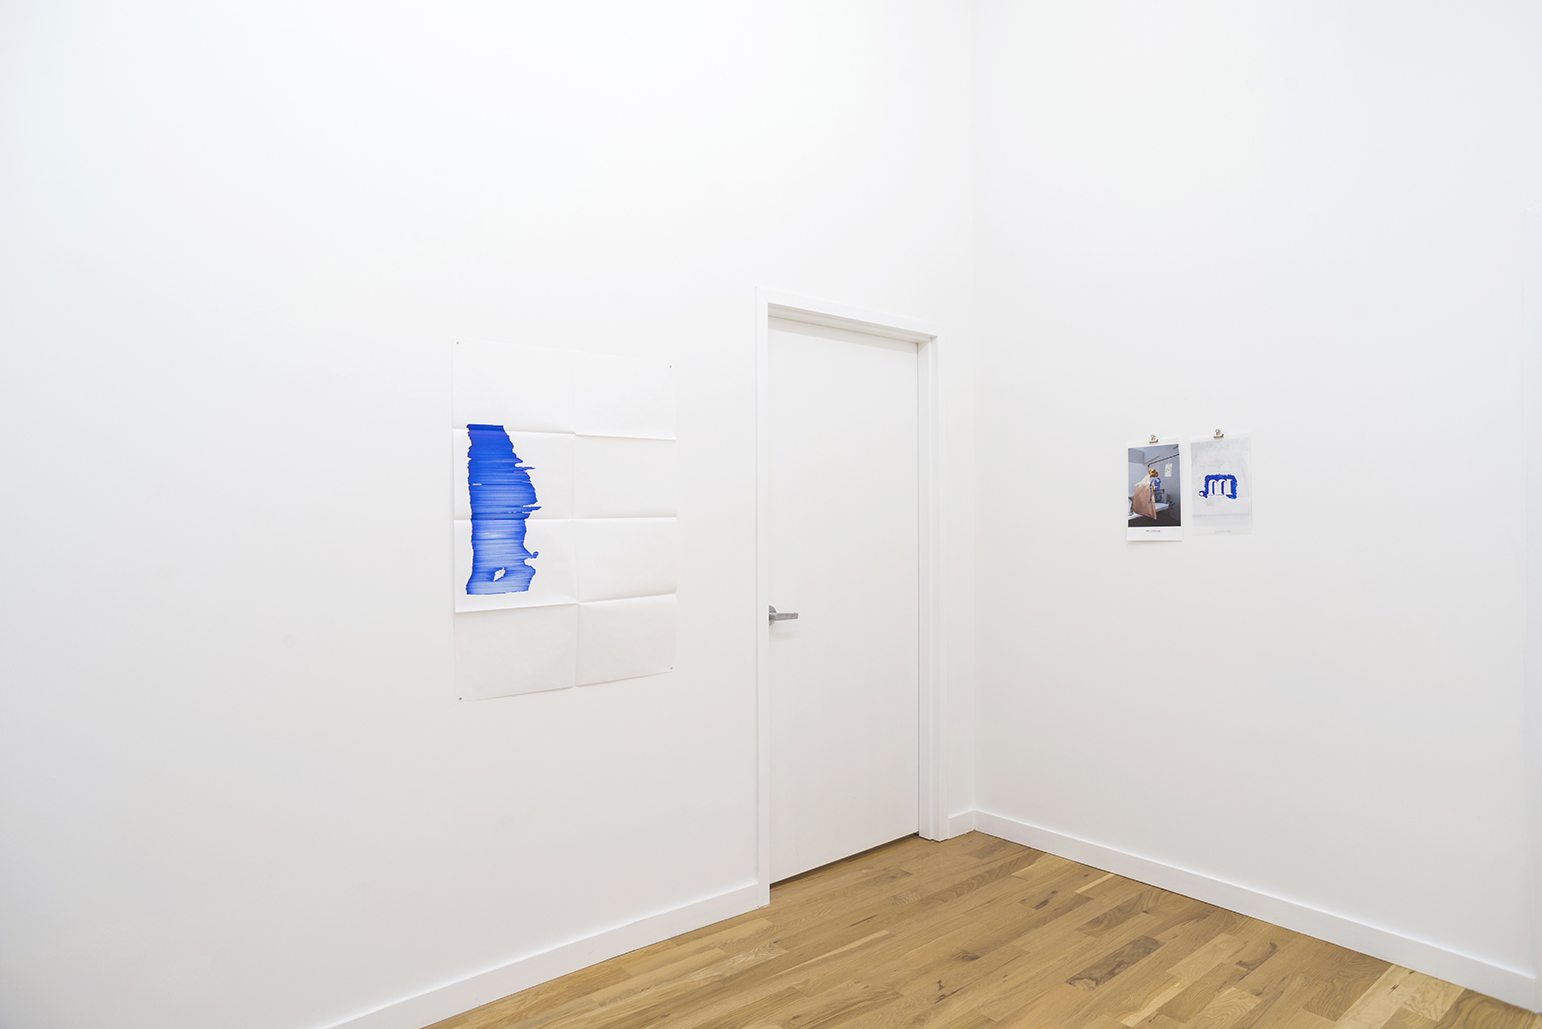 I Don't Like Passion, installation view